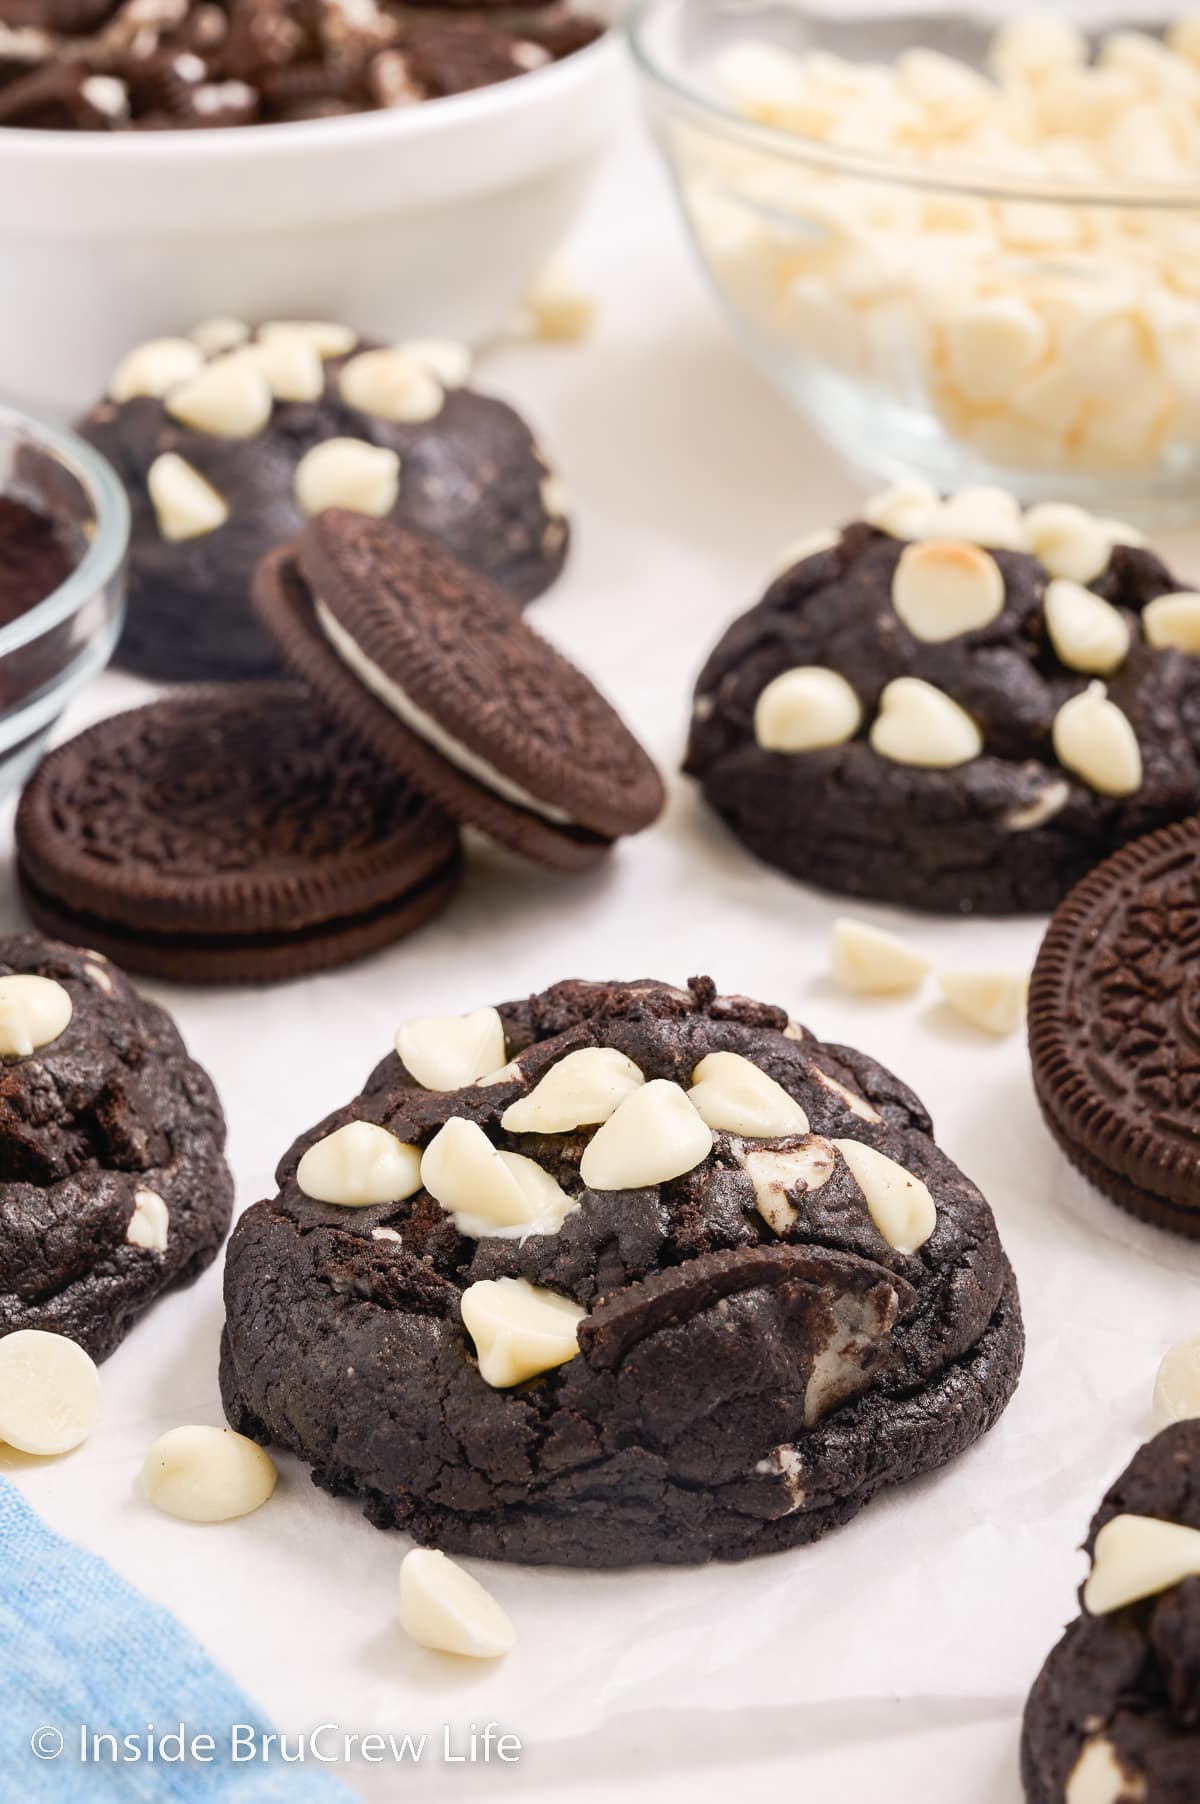 Puffy chocolate Oreo cookies on a white paper.